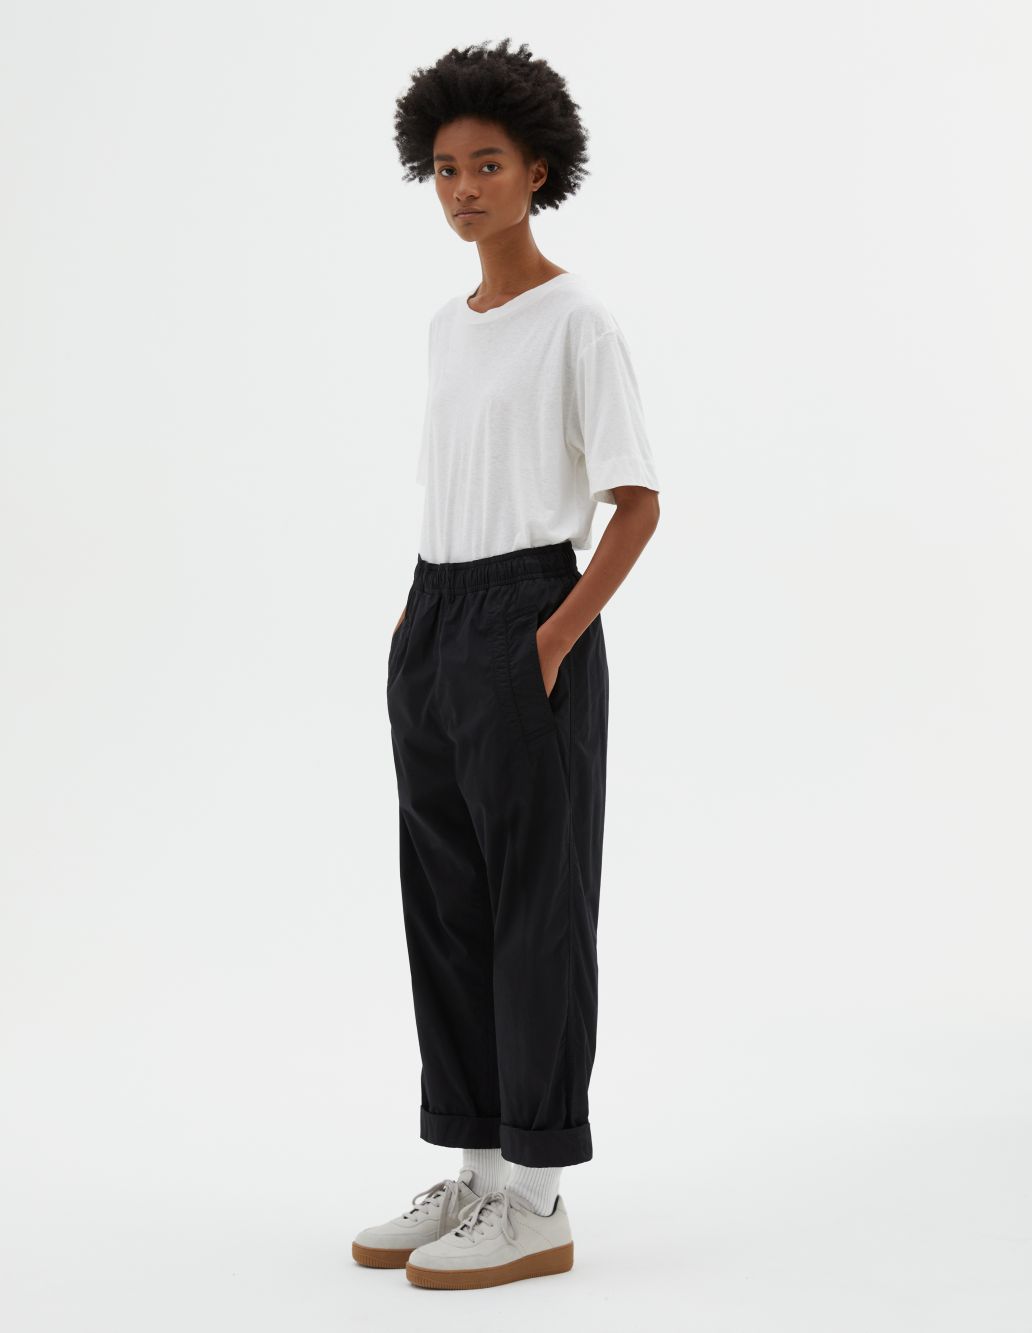 MARGARET HOWELL - Black cotton twill wide leg jogger | MHL. by 